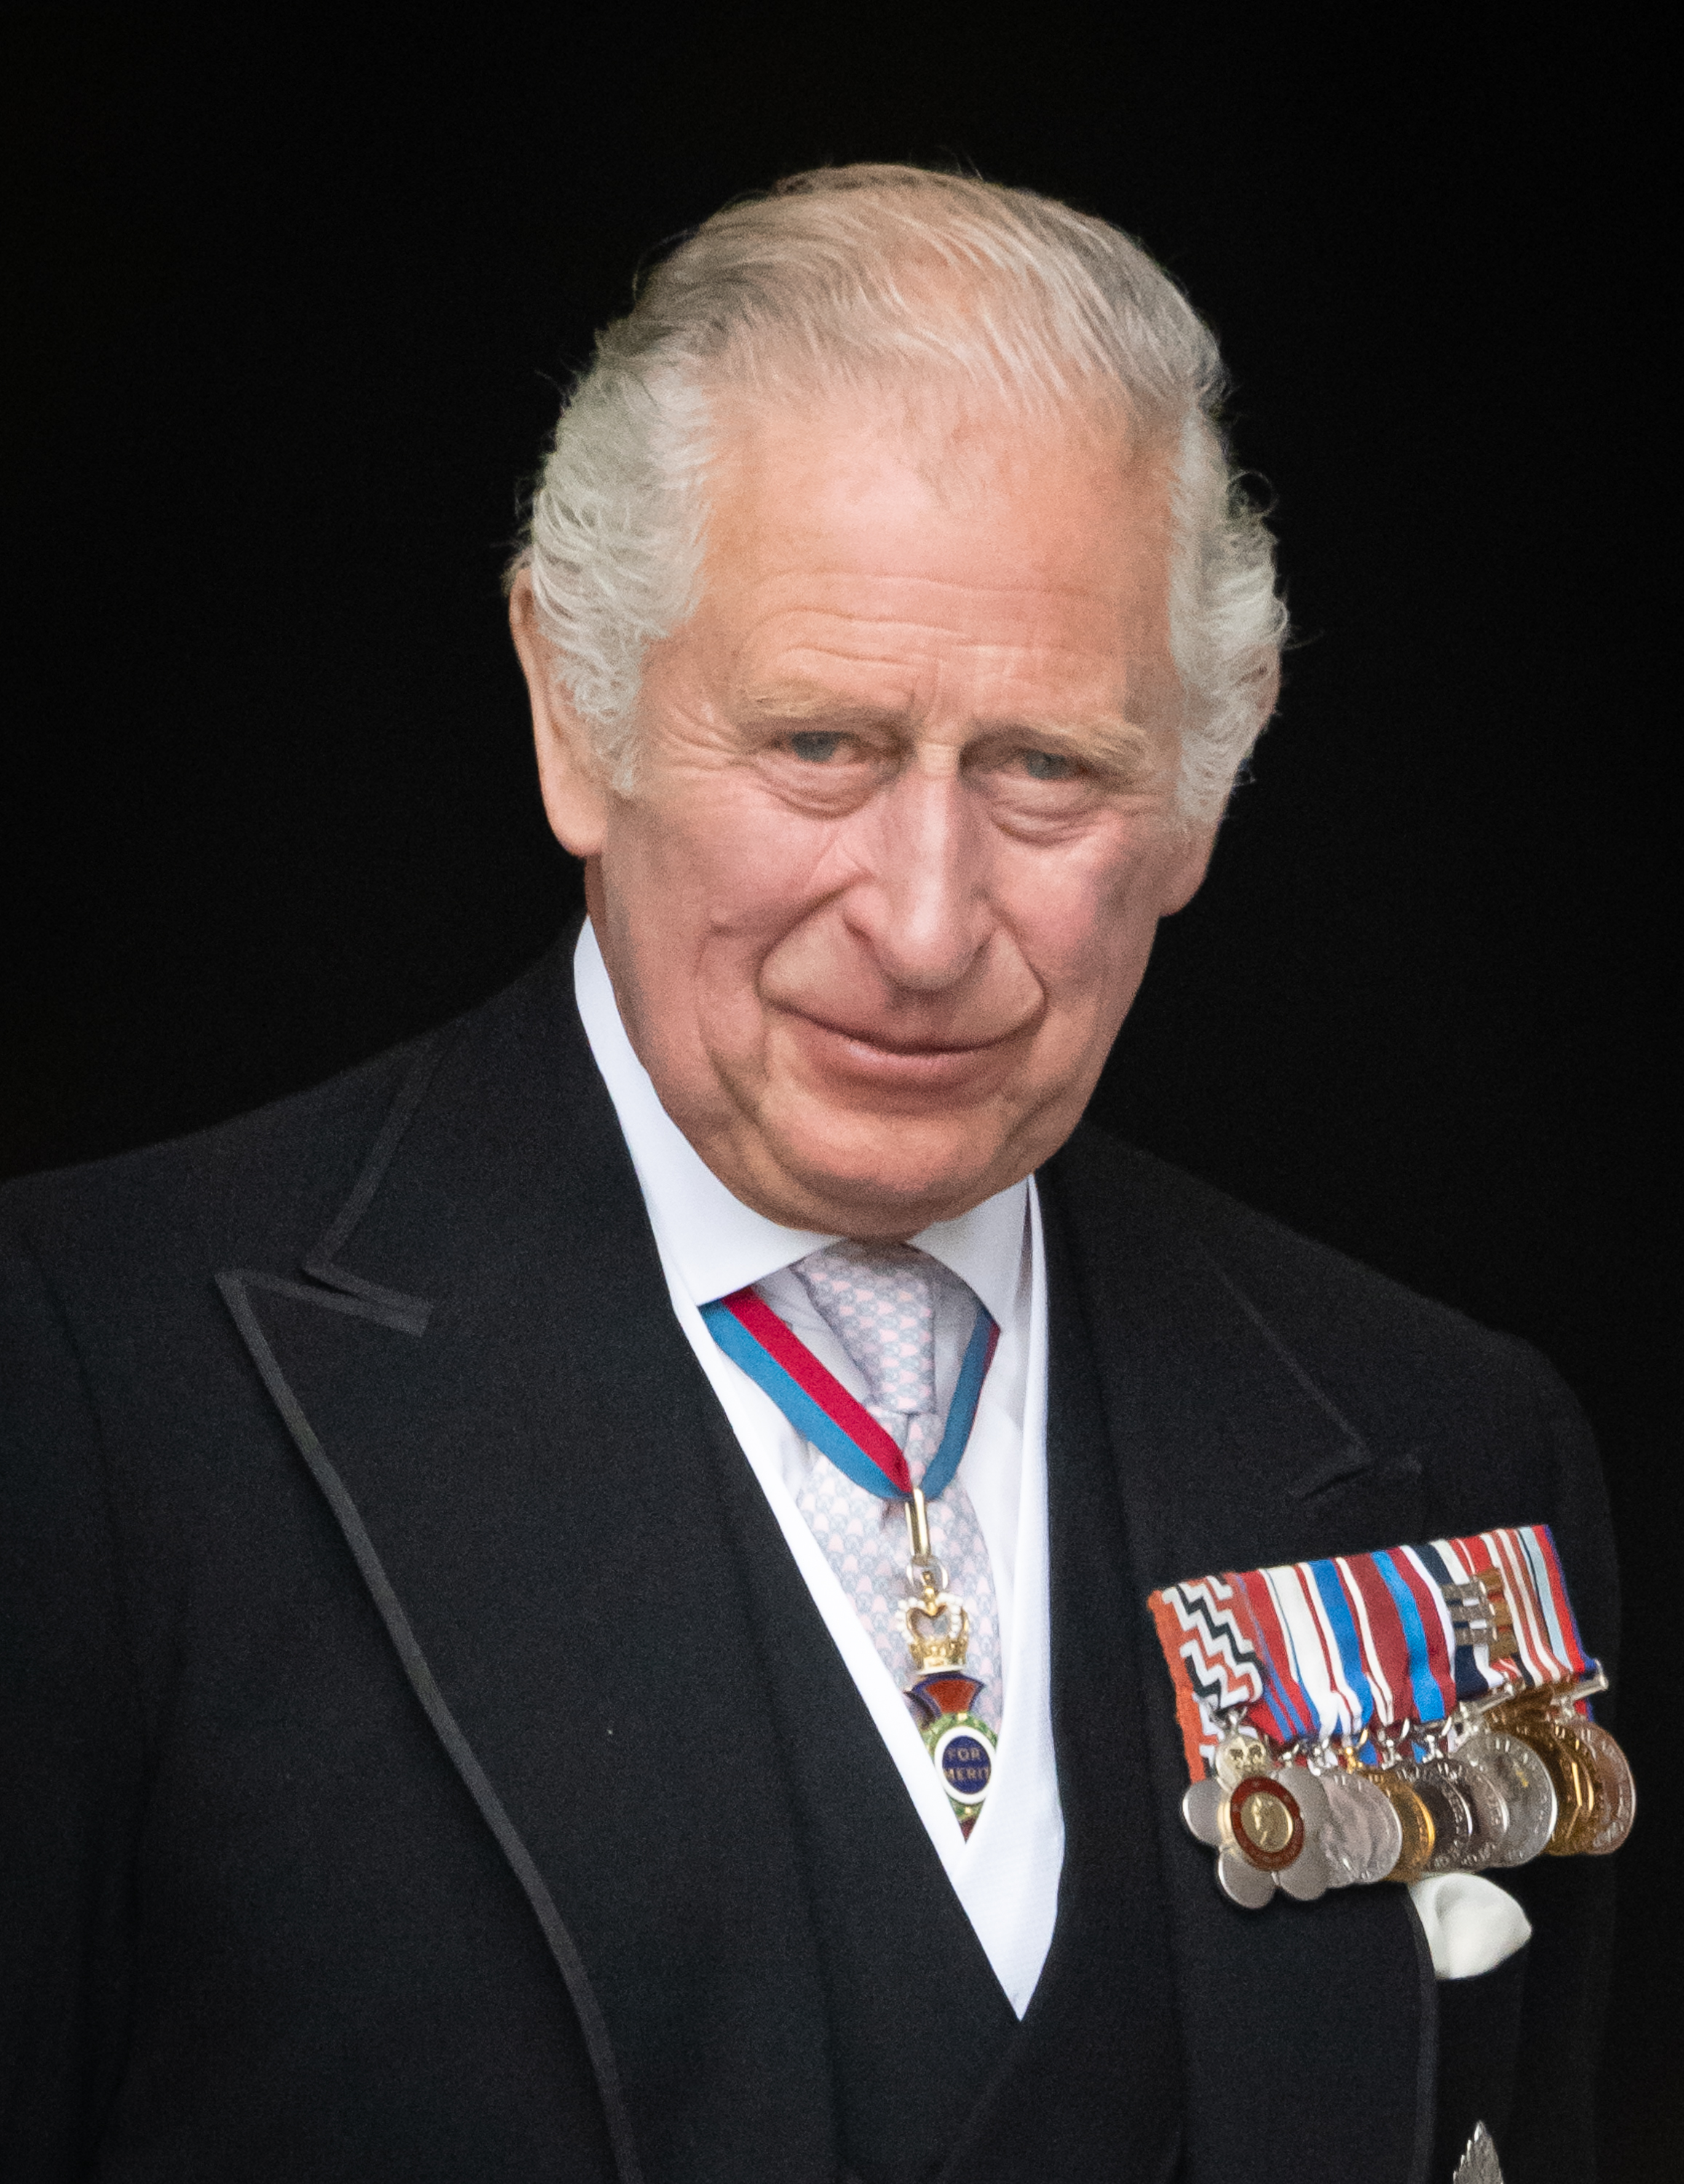 King Charles III attends the National Service of Thanksgiving at St Paul's Cathedral in London, England, on June 3, 2022. | Source: Getty Images